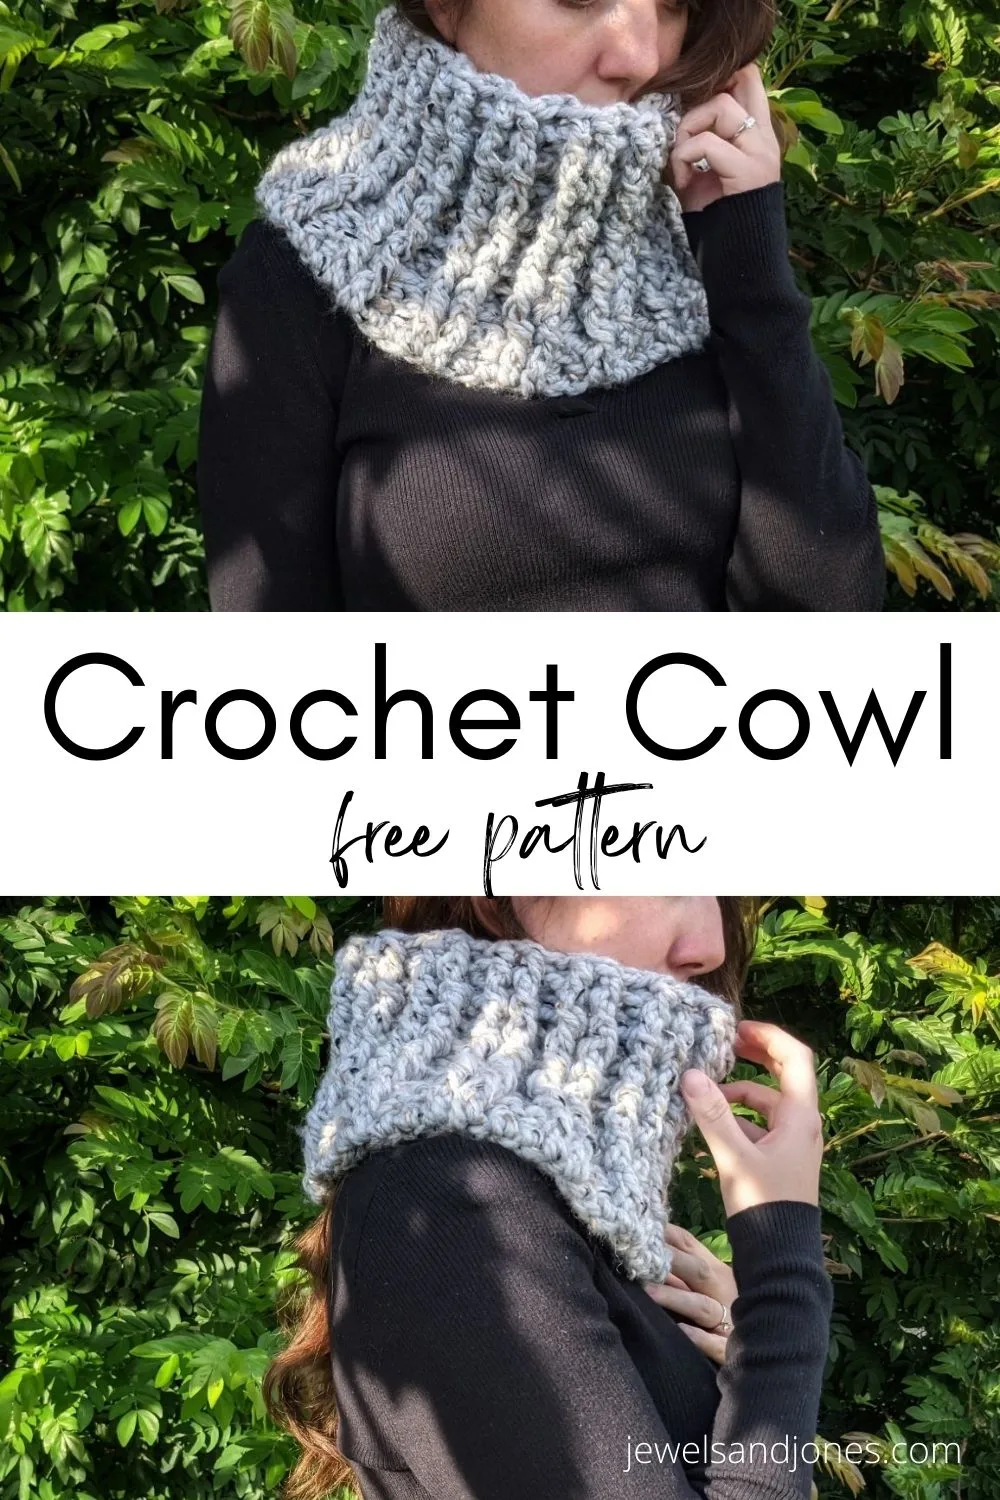 learn how to crochet a cowl with this free crochet pattern